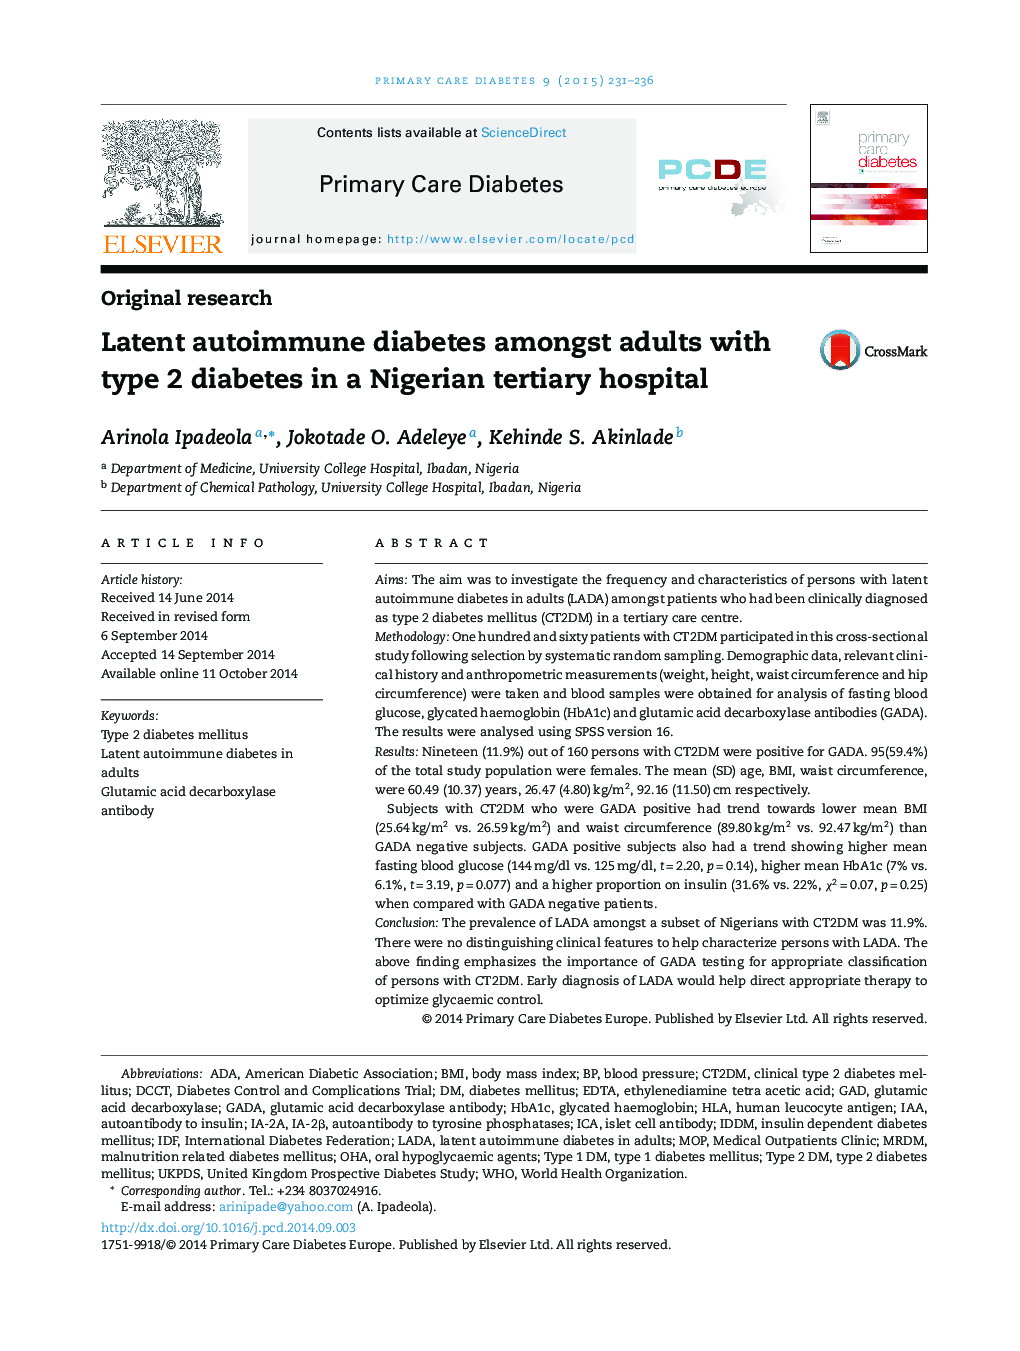 Latent autoimmune diabetes amongst adults with type 2 diabetes in a Nigerian tertiary hospital